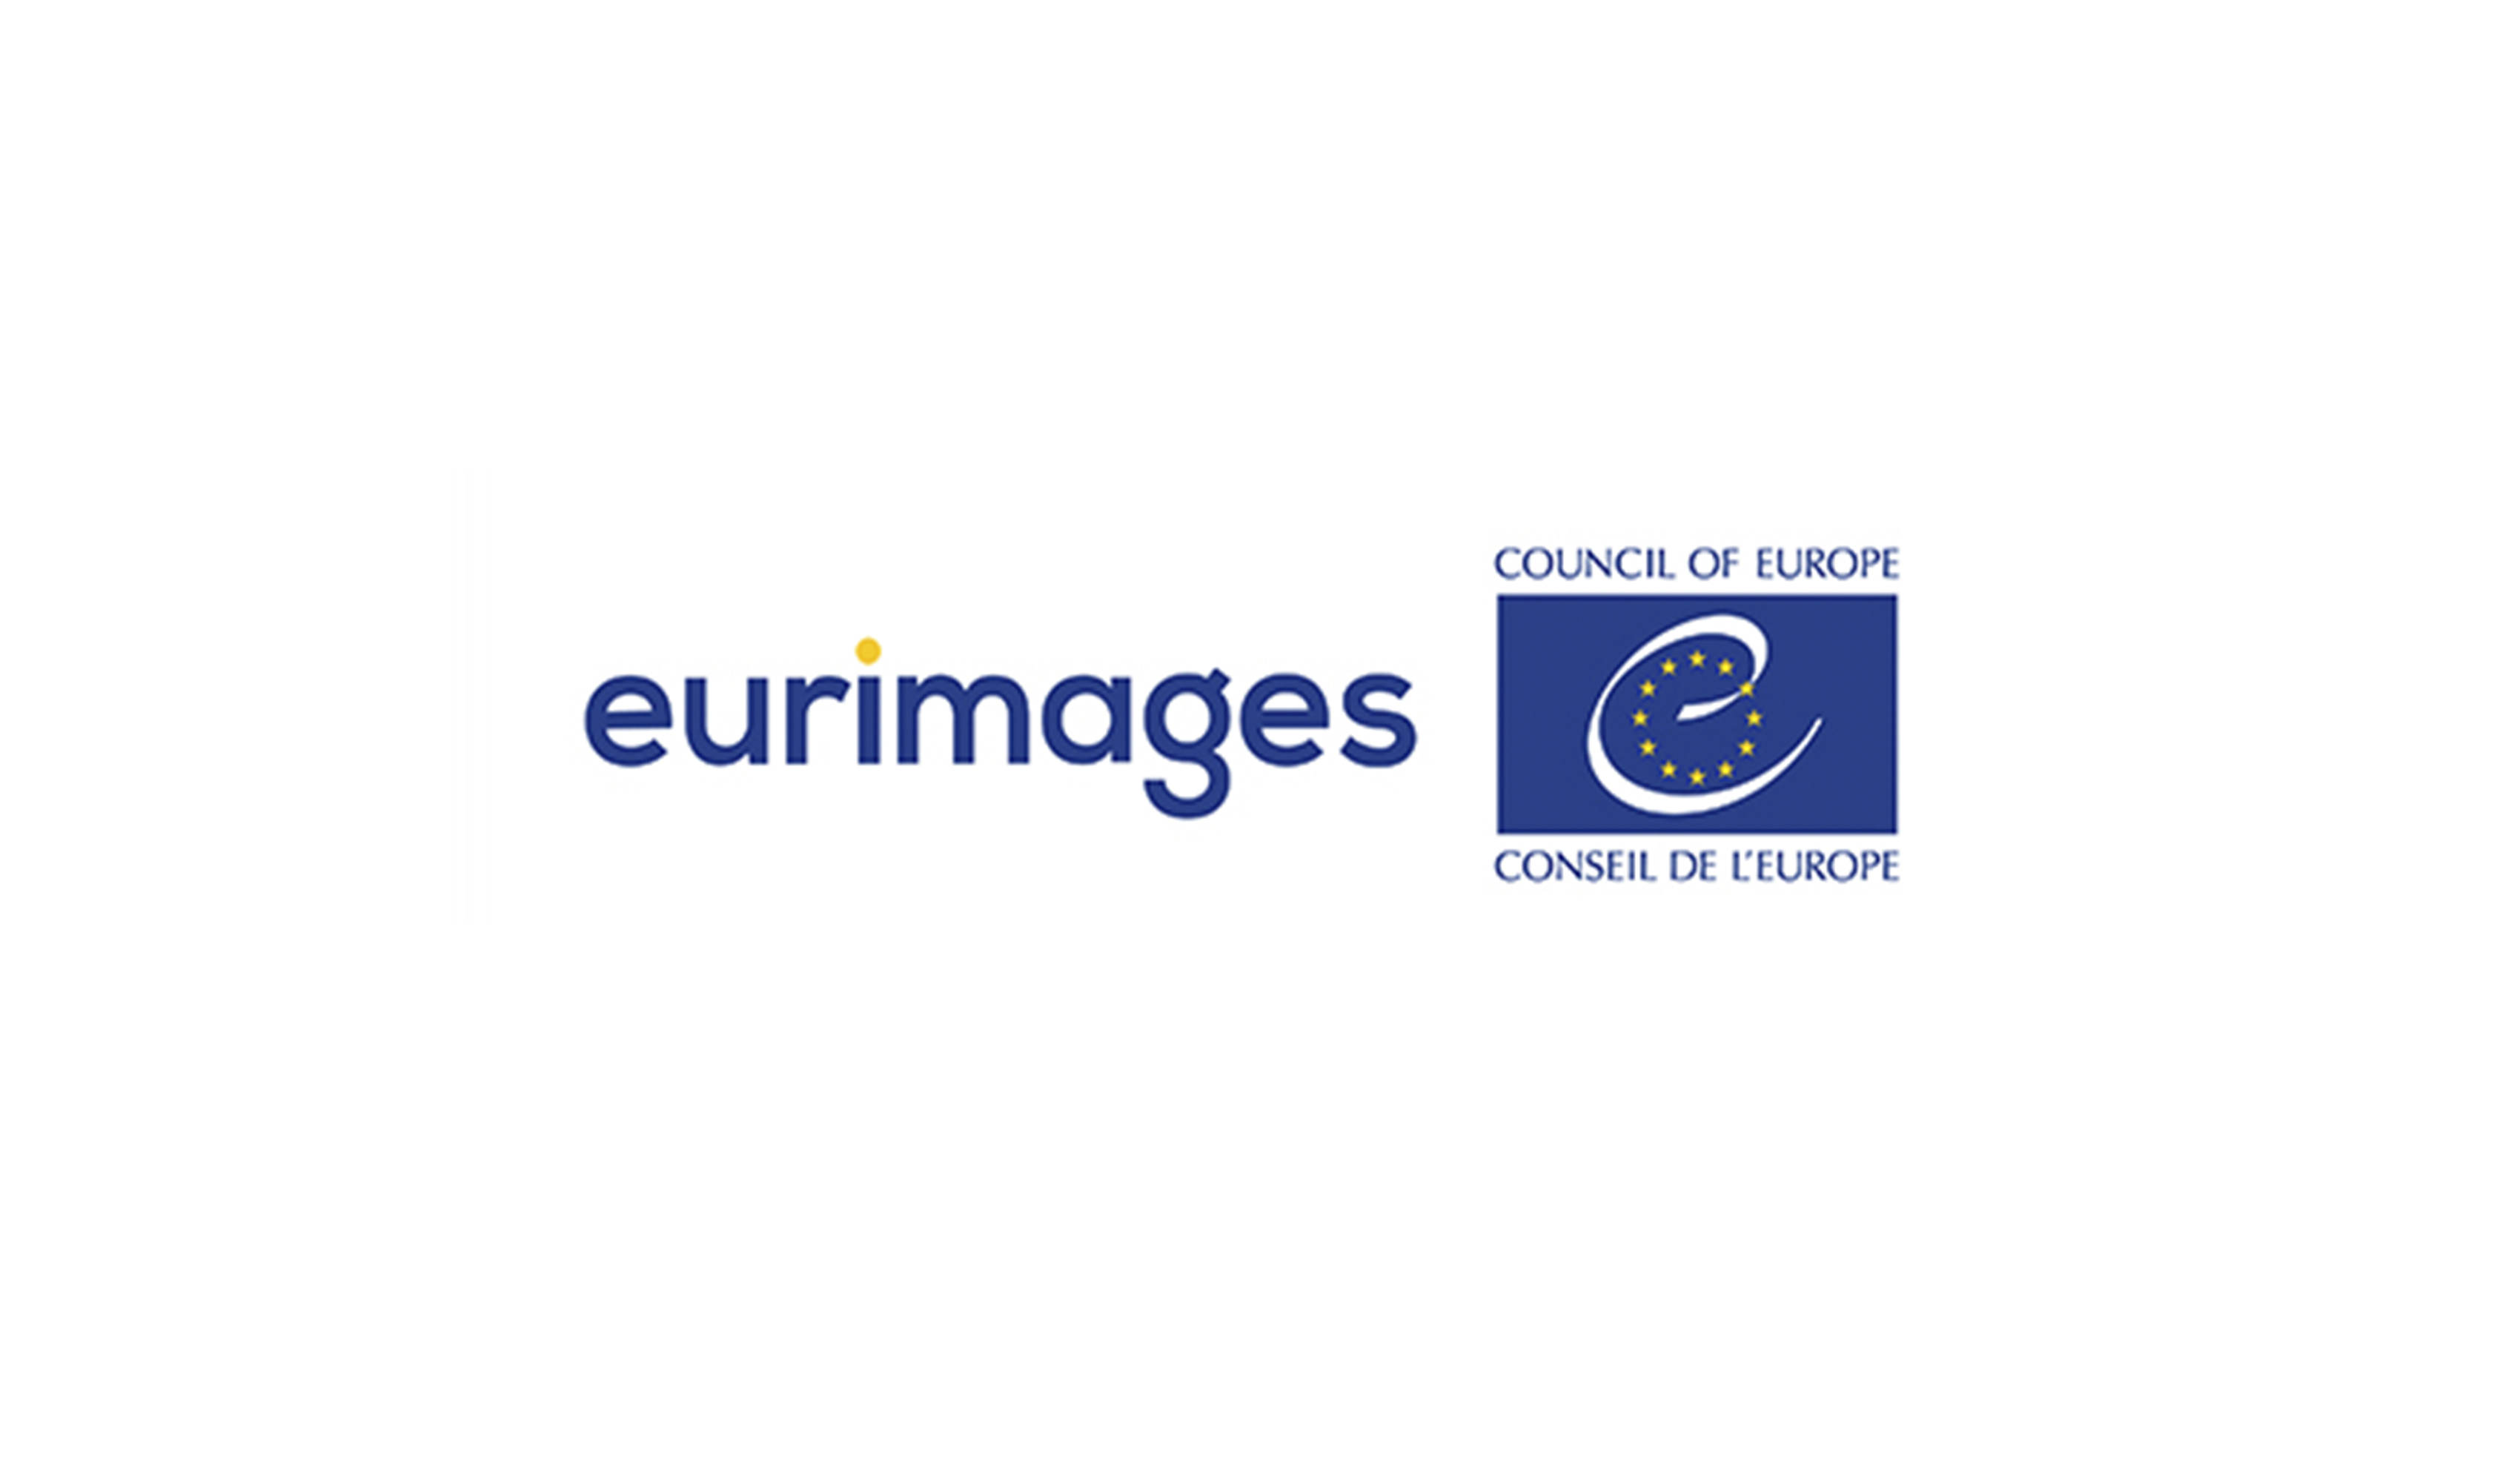 EURIMAGES